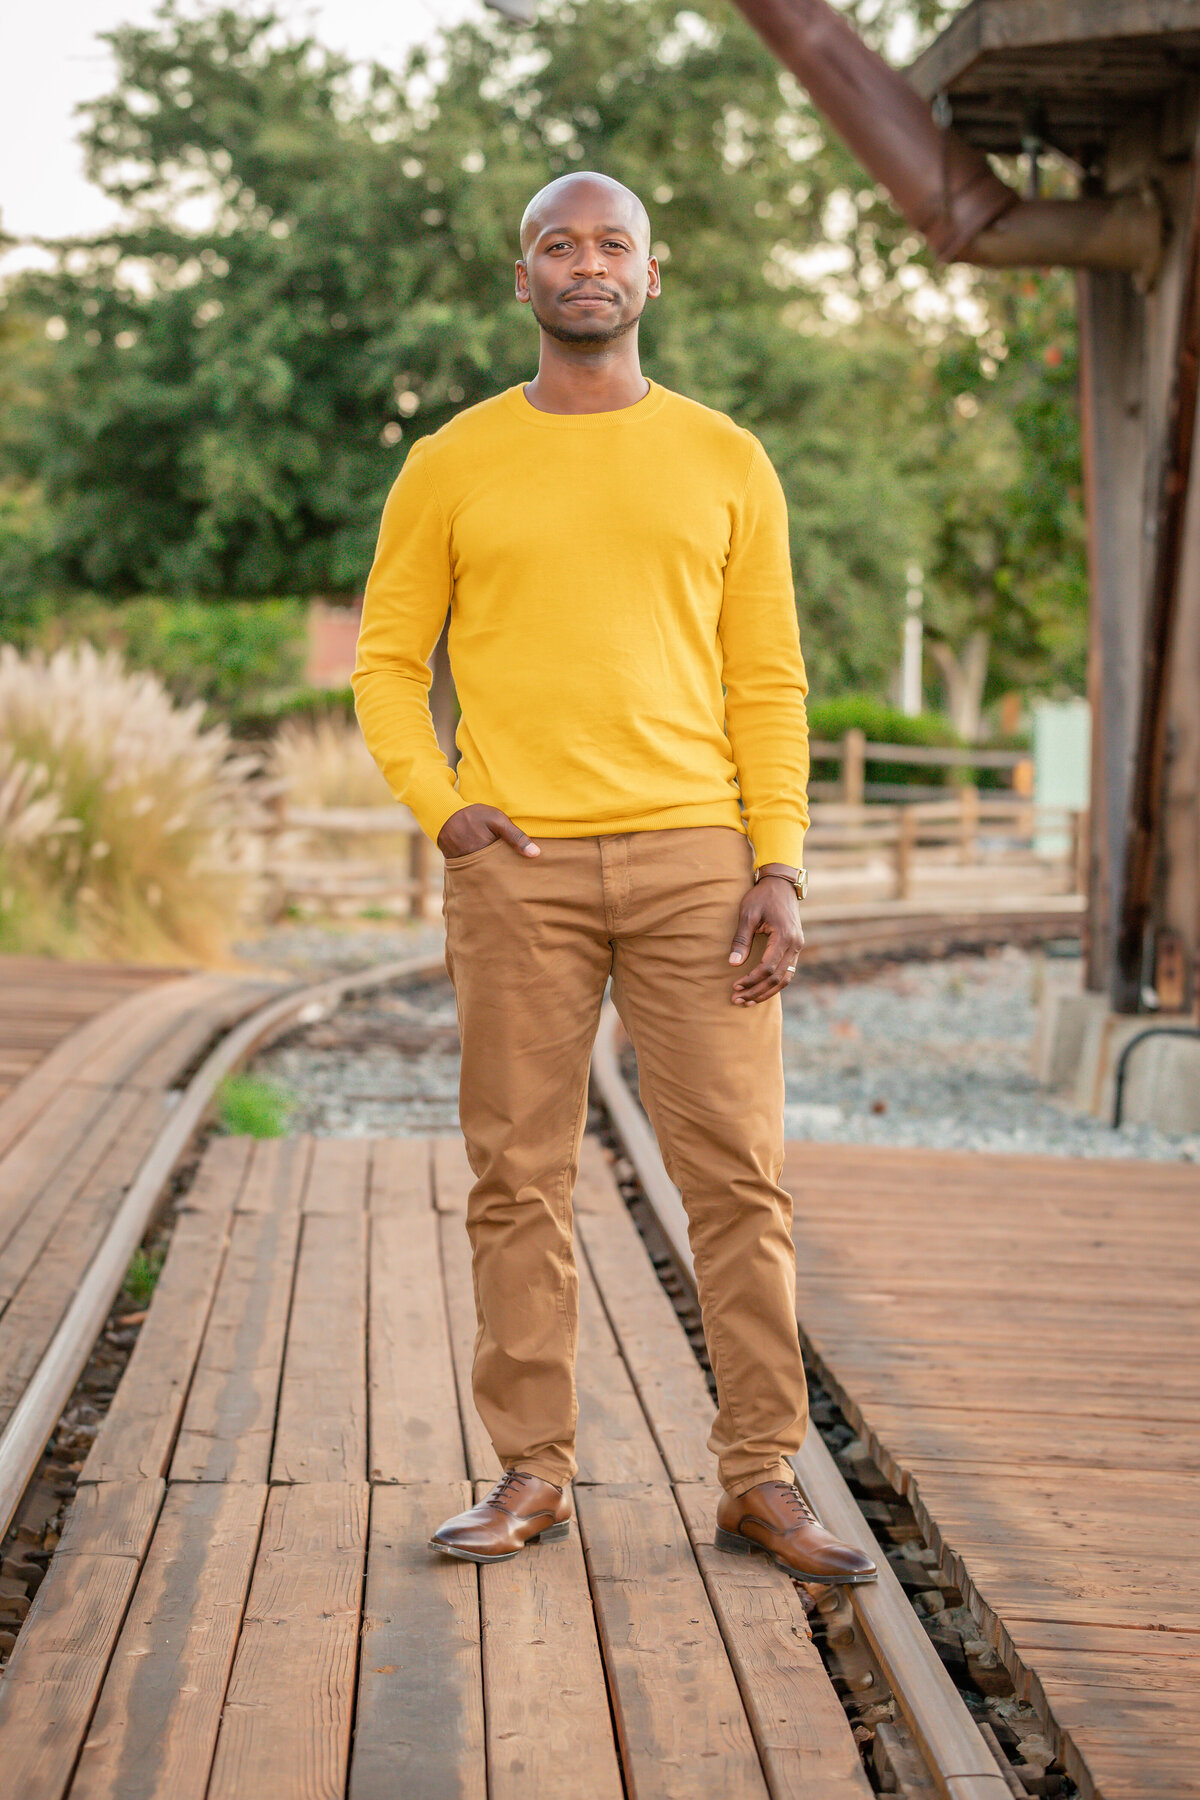 Black man in yellow standing in front of water tower